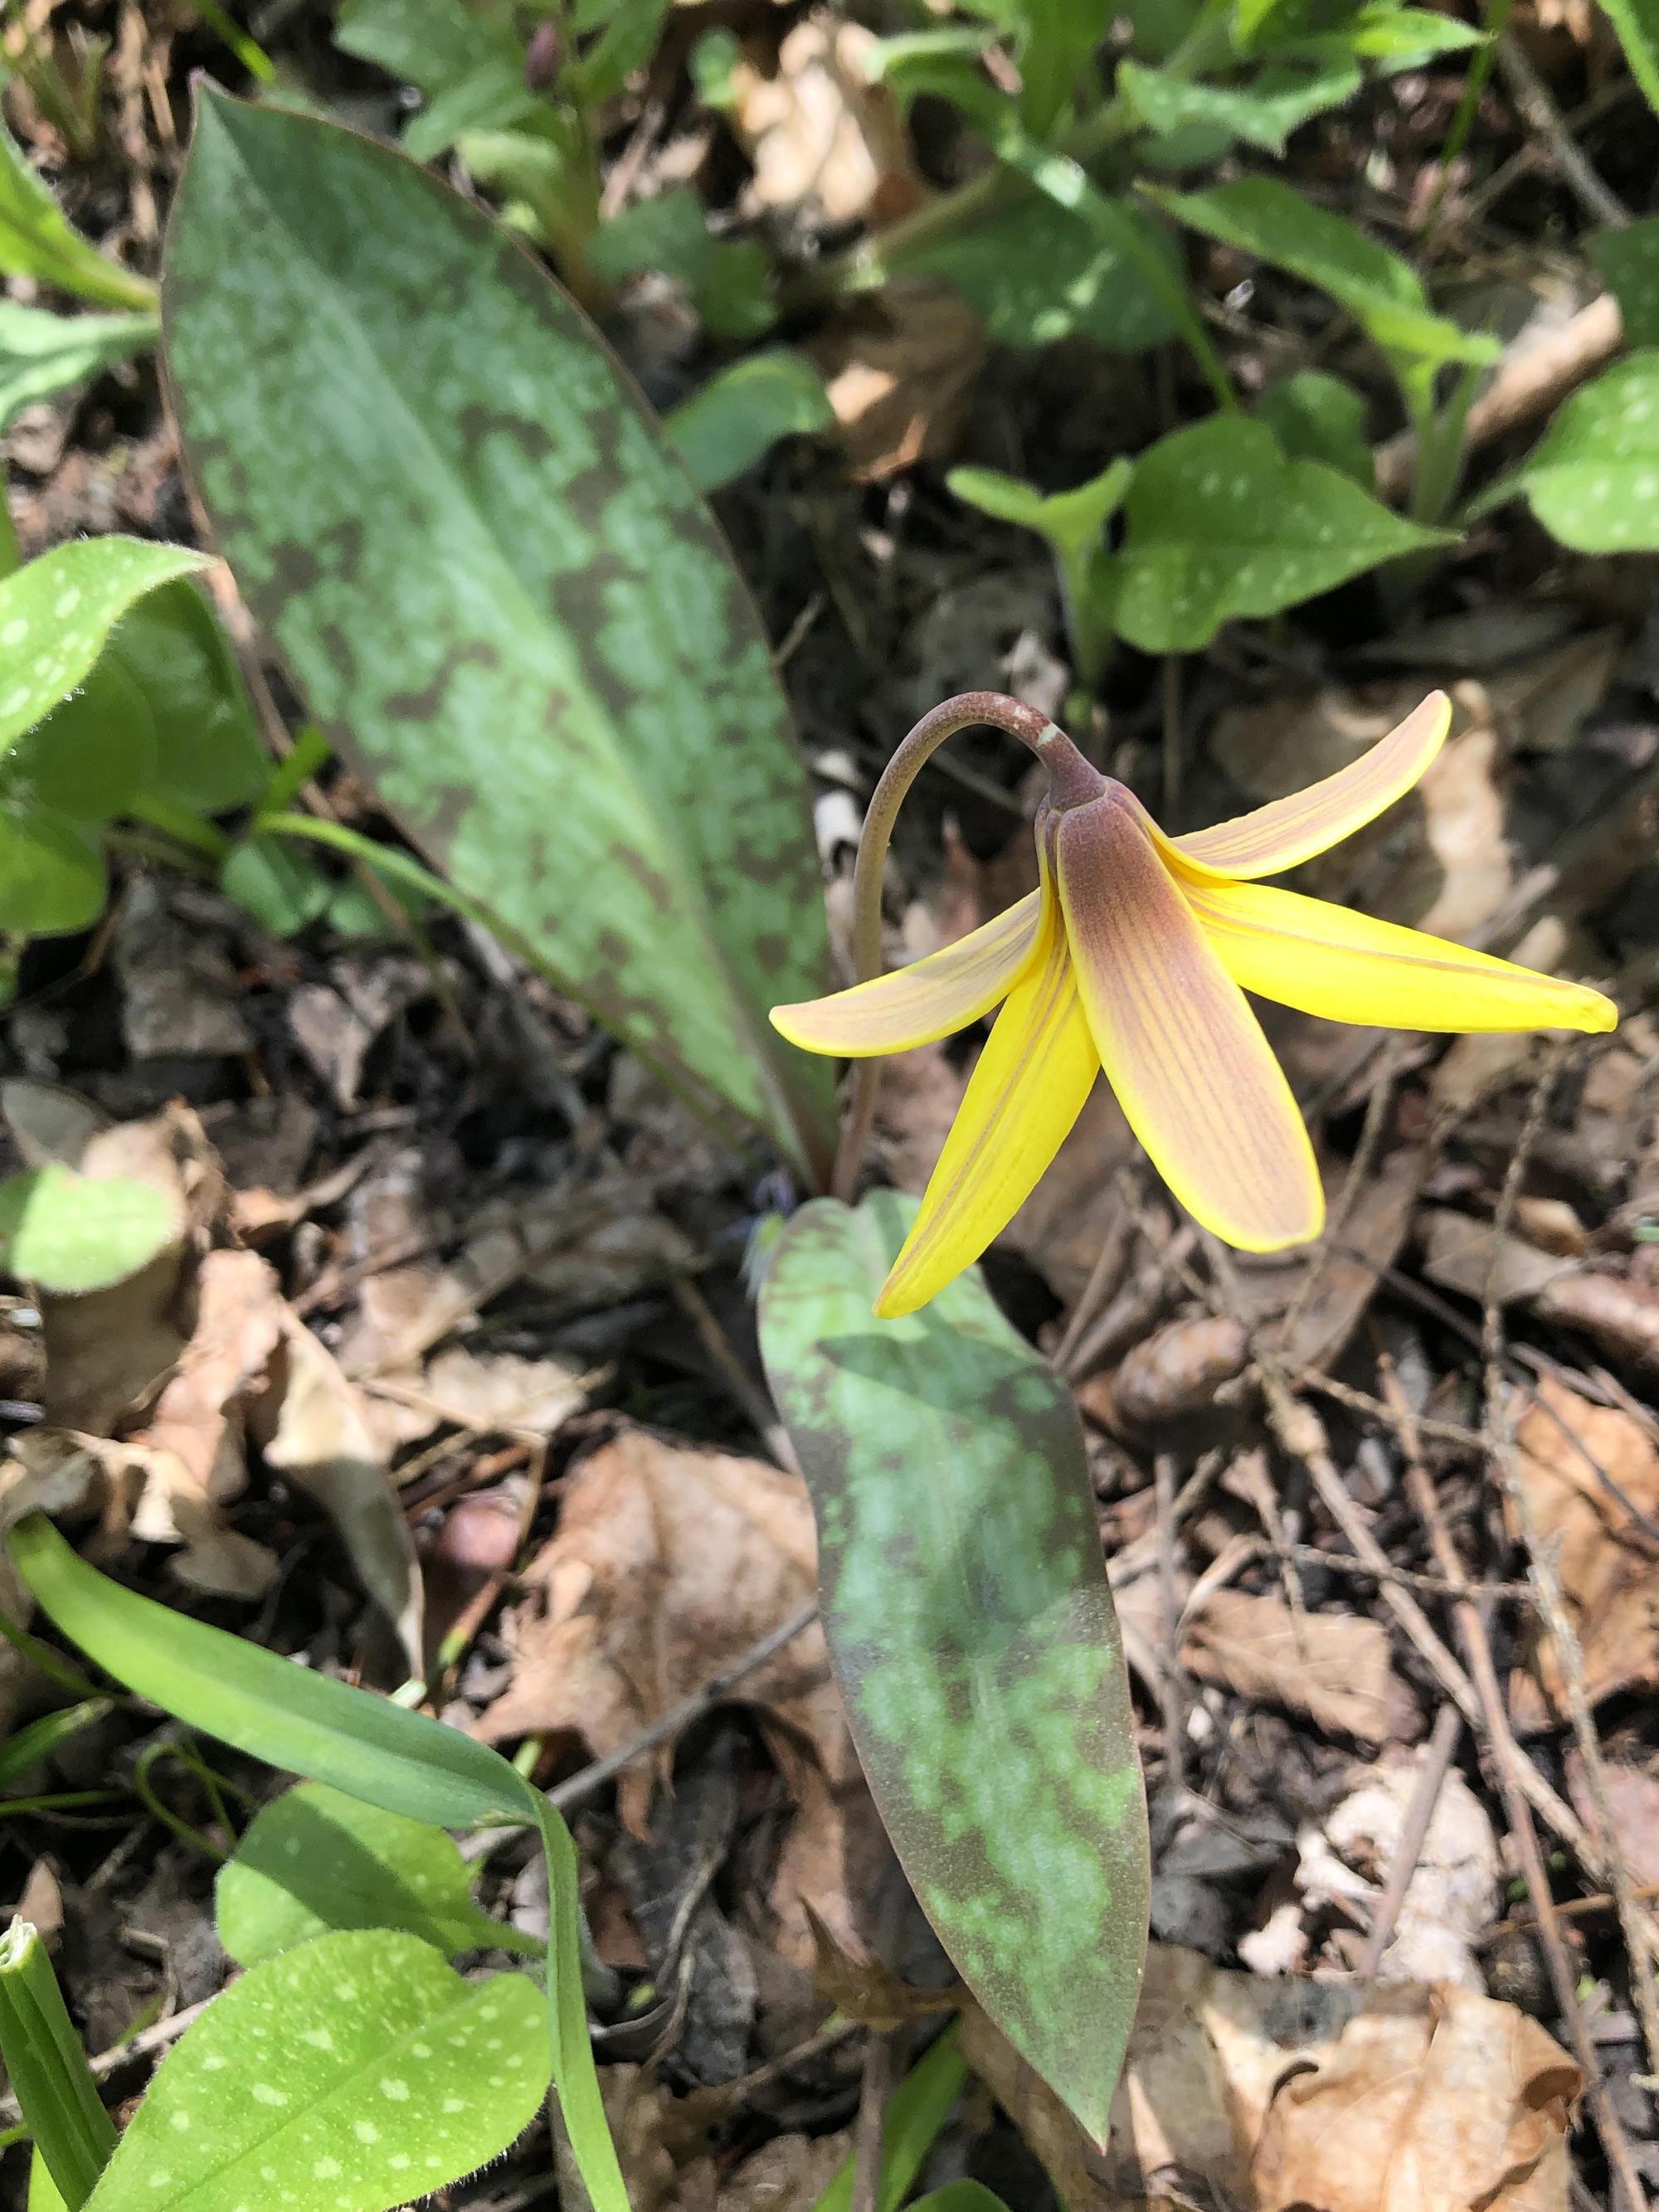 Yellow Trout Lily photo taken taken on May 4, 2022 in Madison, Wisconsin near Agawa Path.